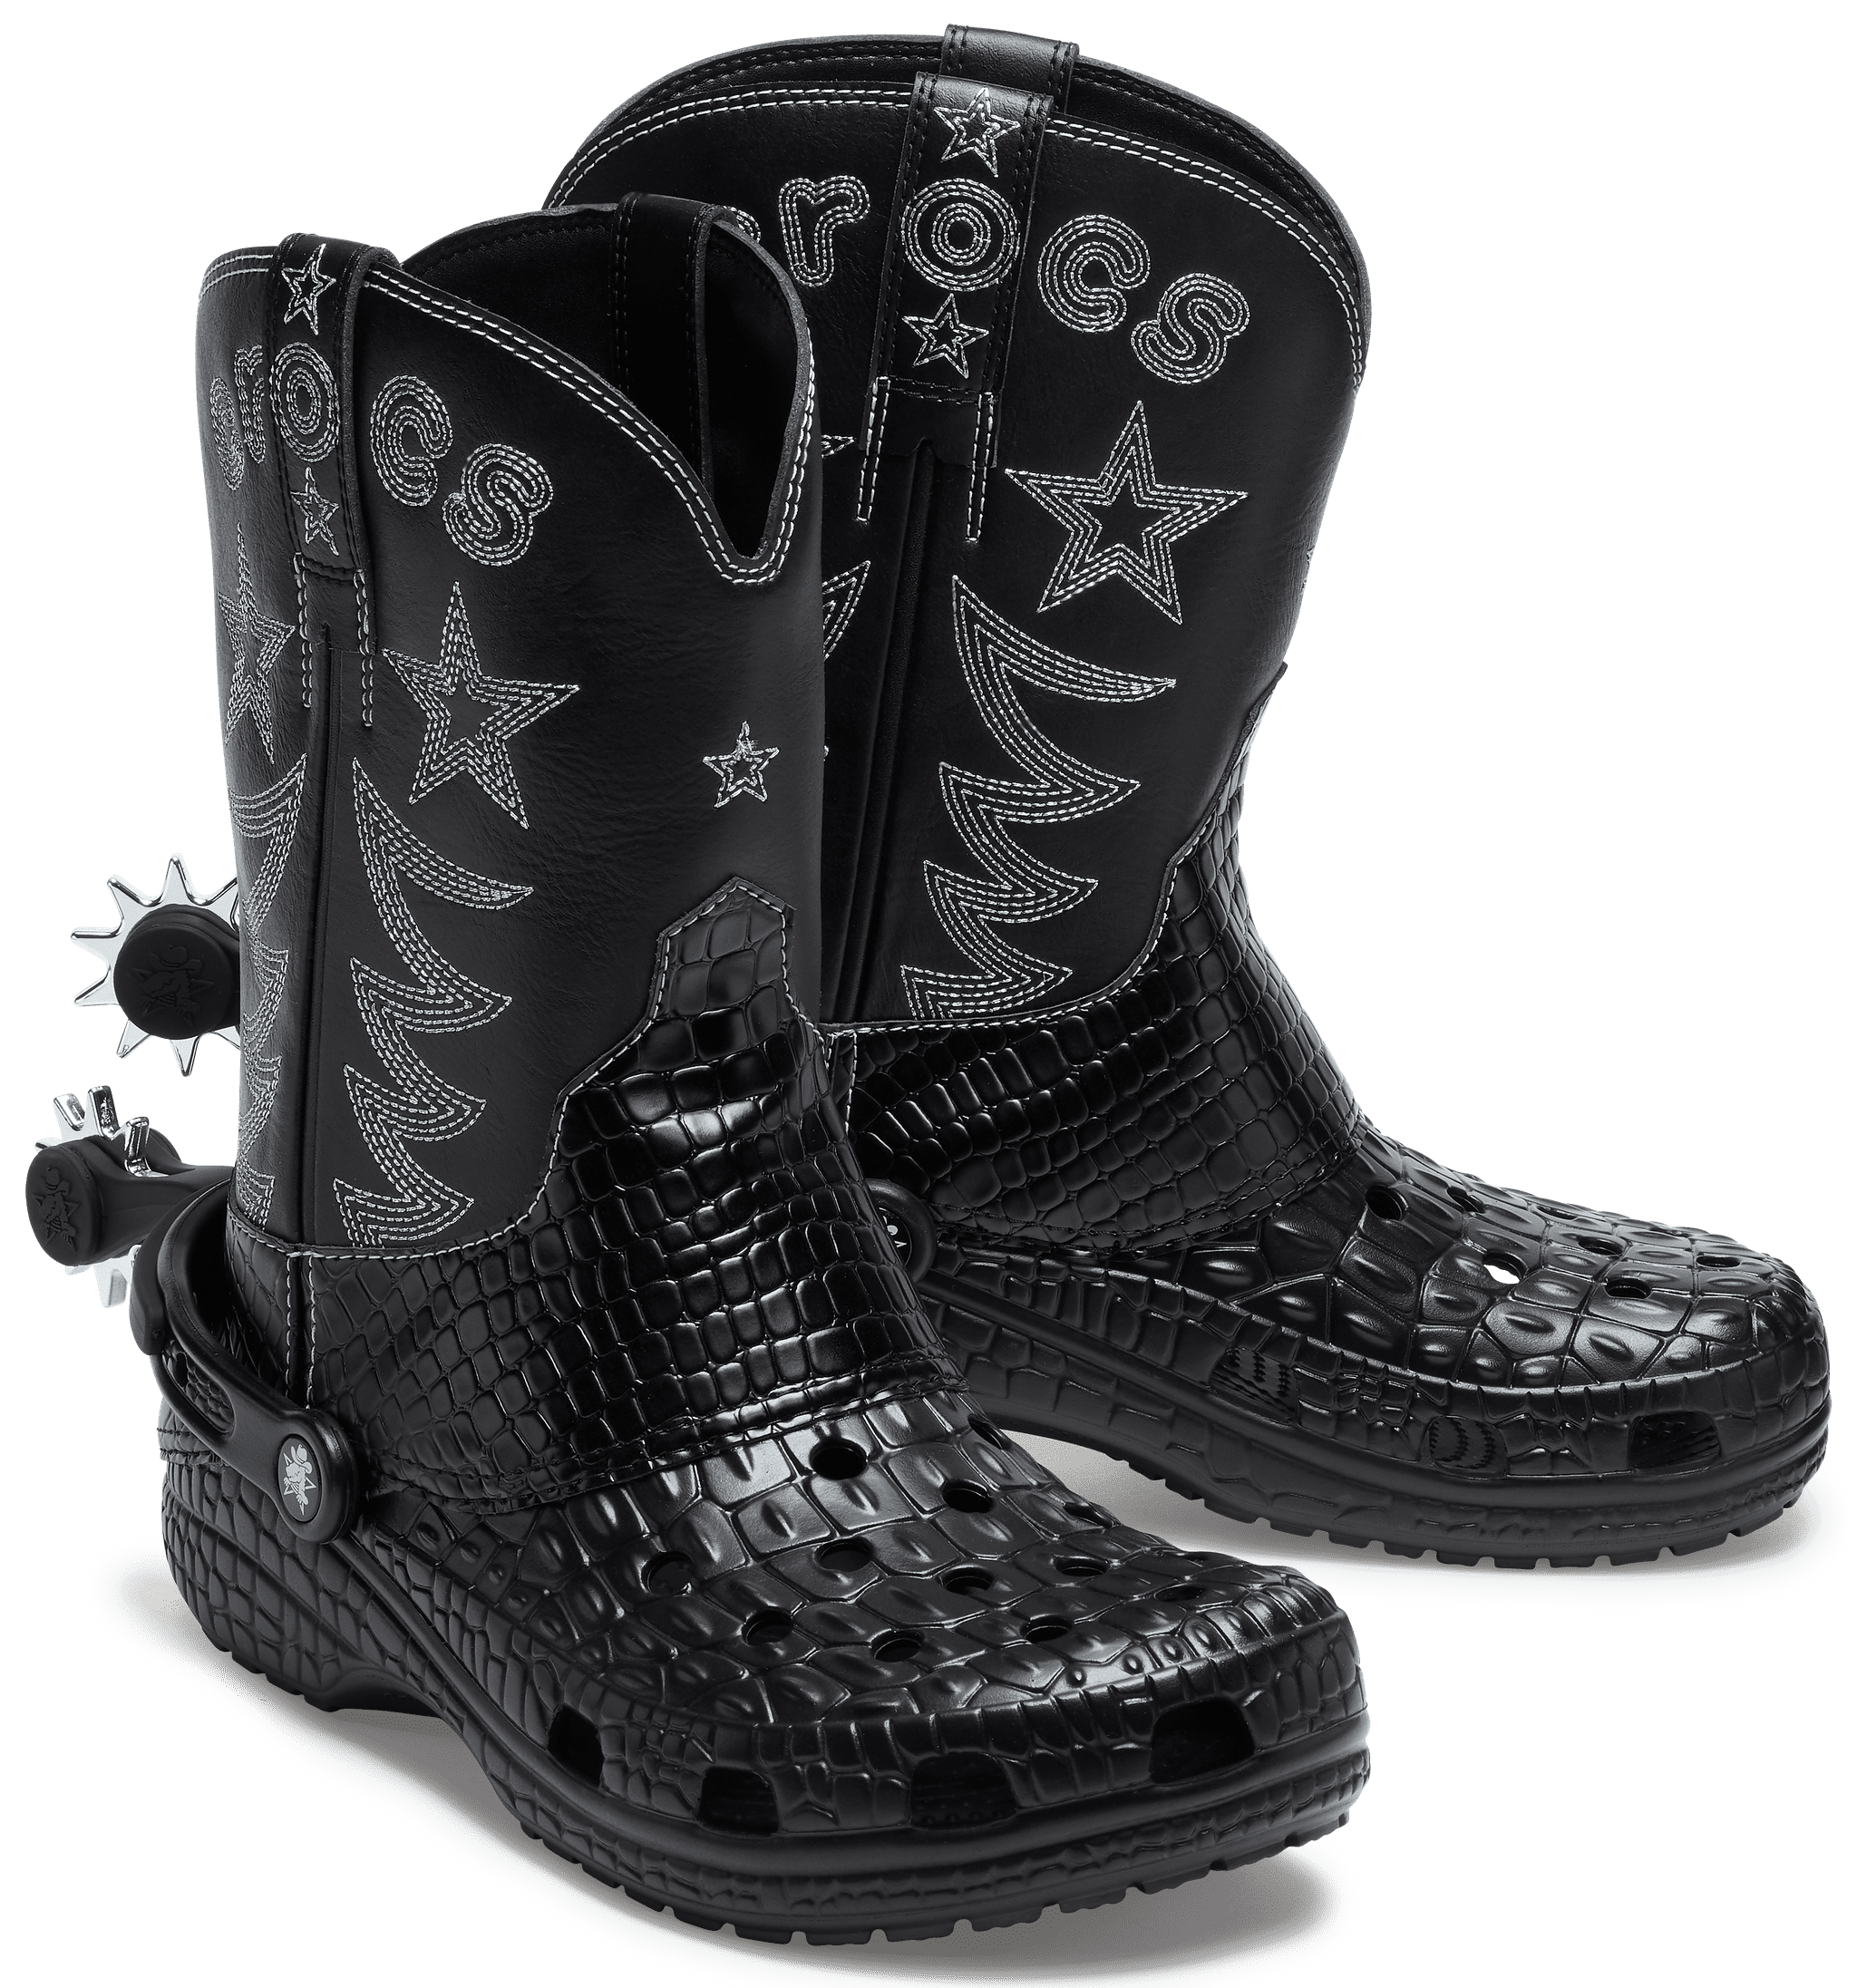 Crocs Cowboy Boots: Where and When to Buy Them | POPSUGAR Fashion UK